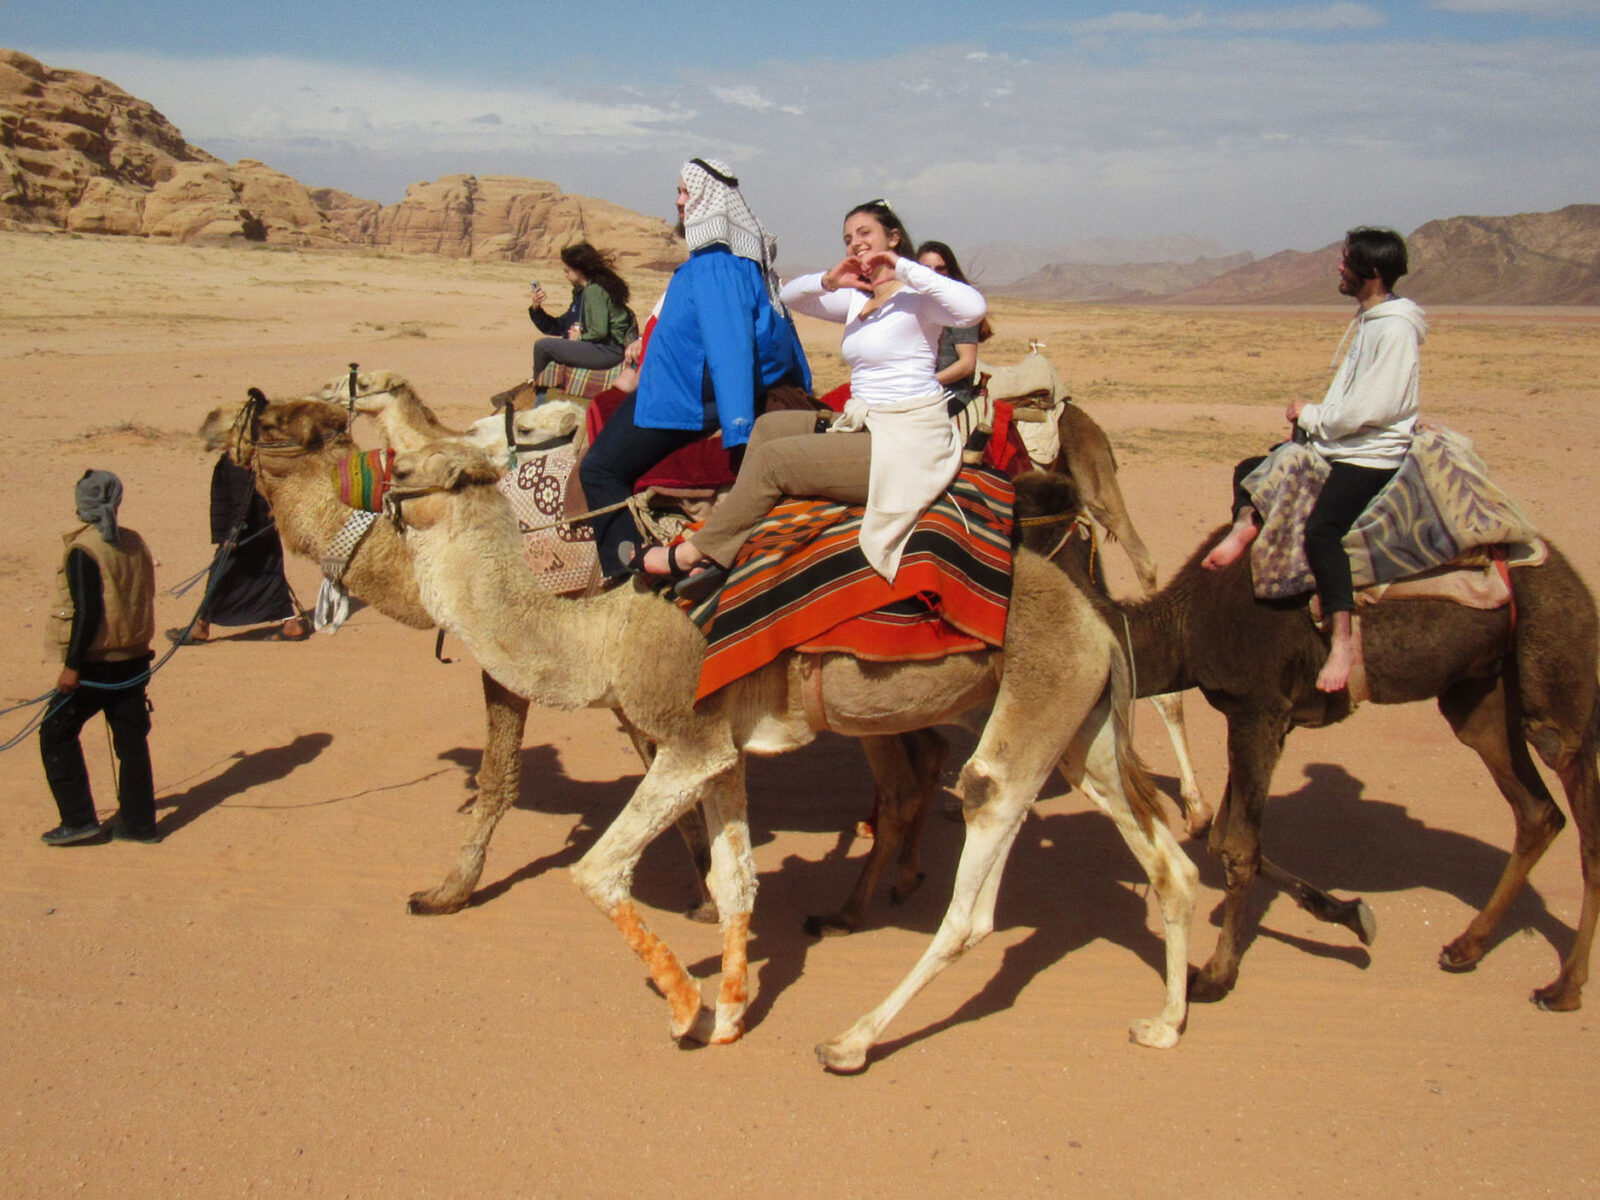 abroad students riding camels through the desert of jordan while waving at the camera